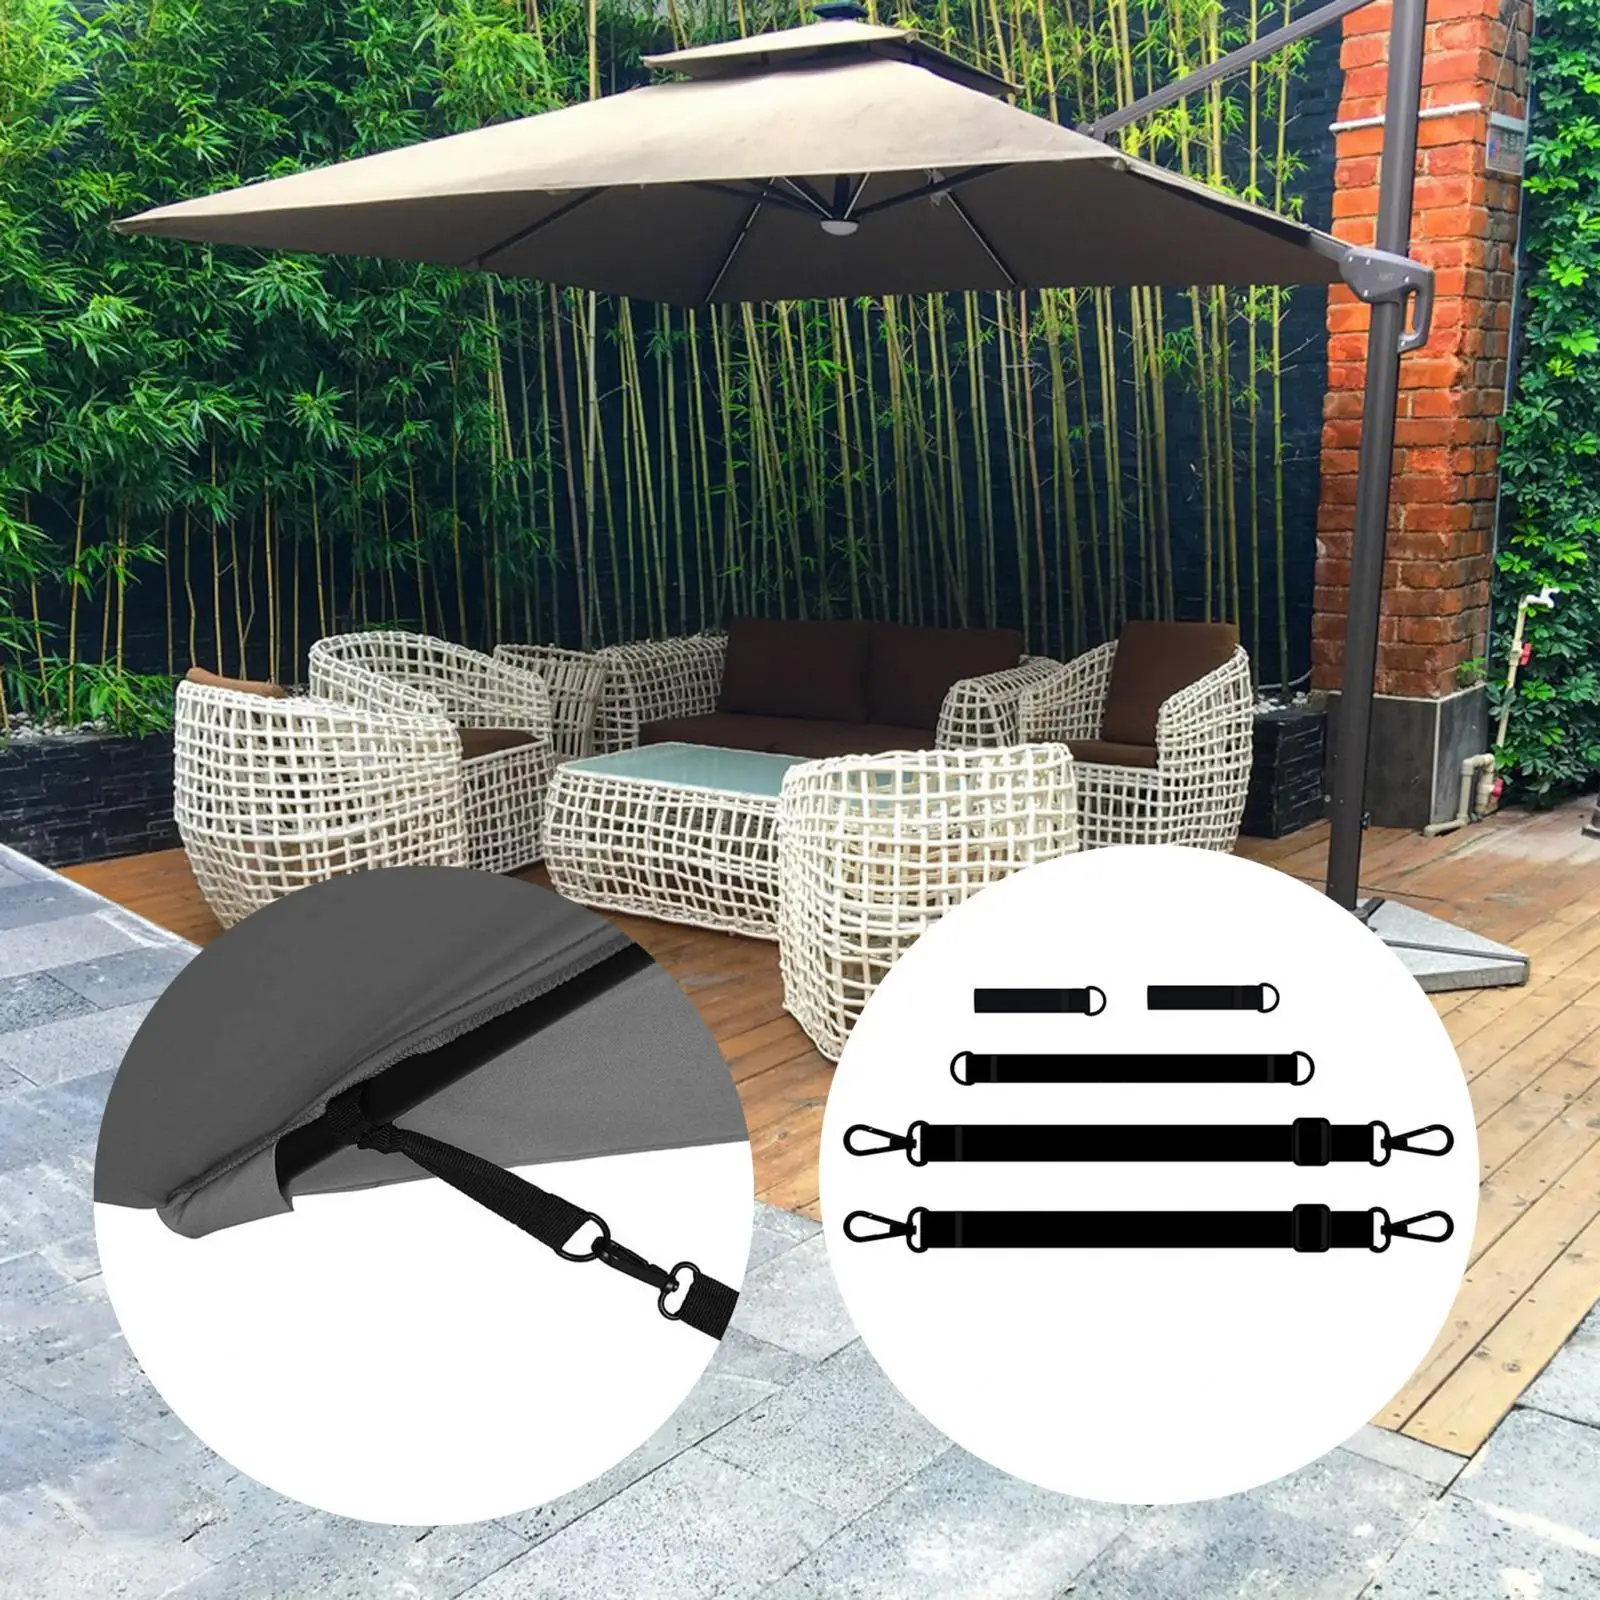 5Pcs Outdoor Umbrella Strap Adjustable Awning Strap for Shading Yard Outdoor